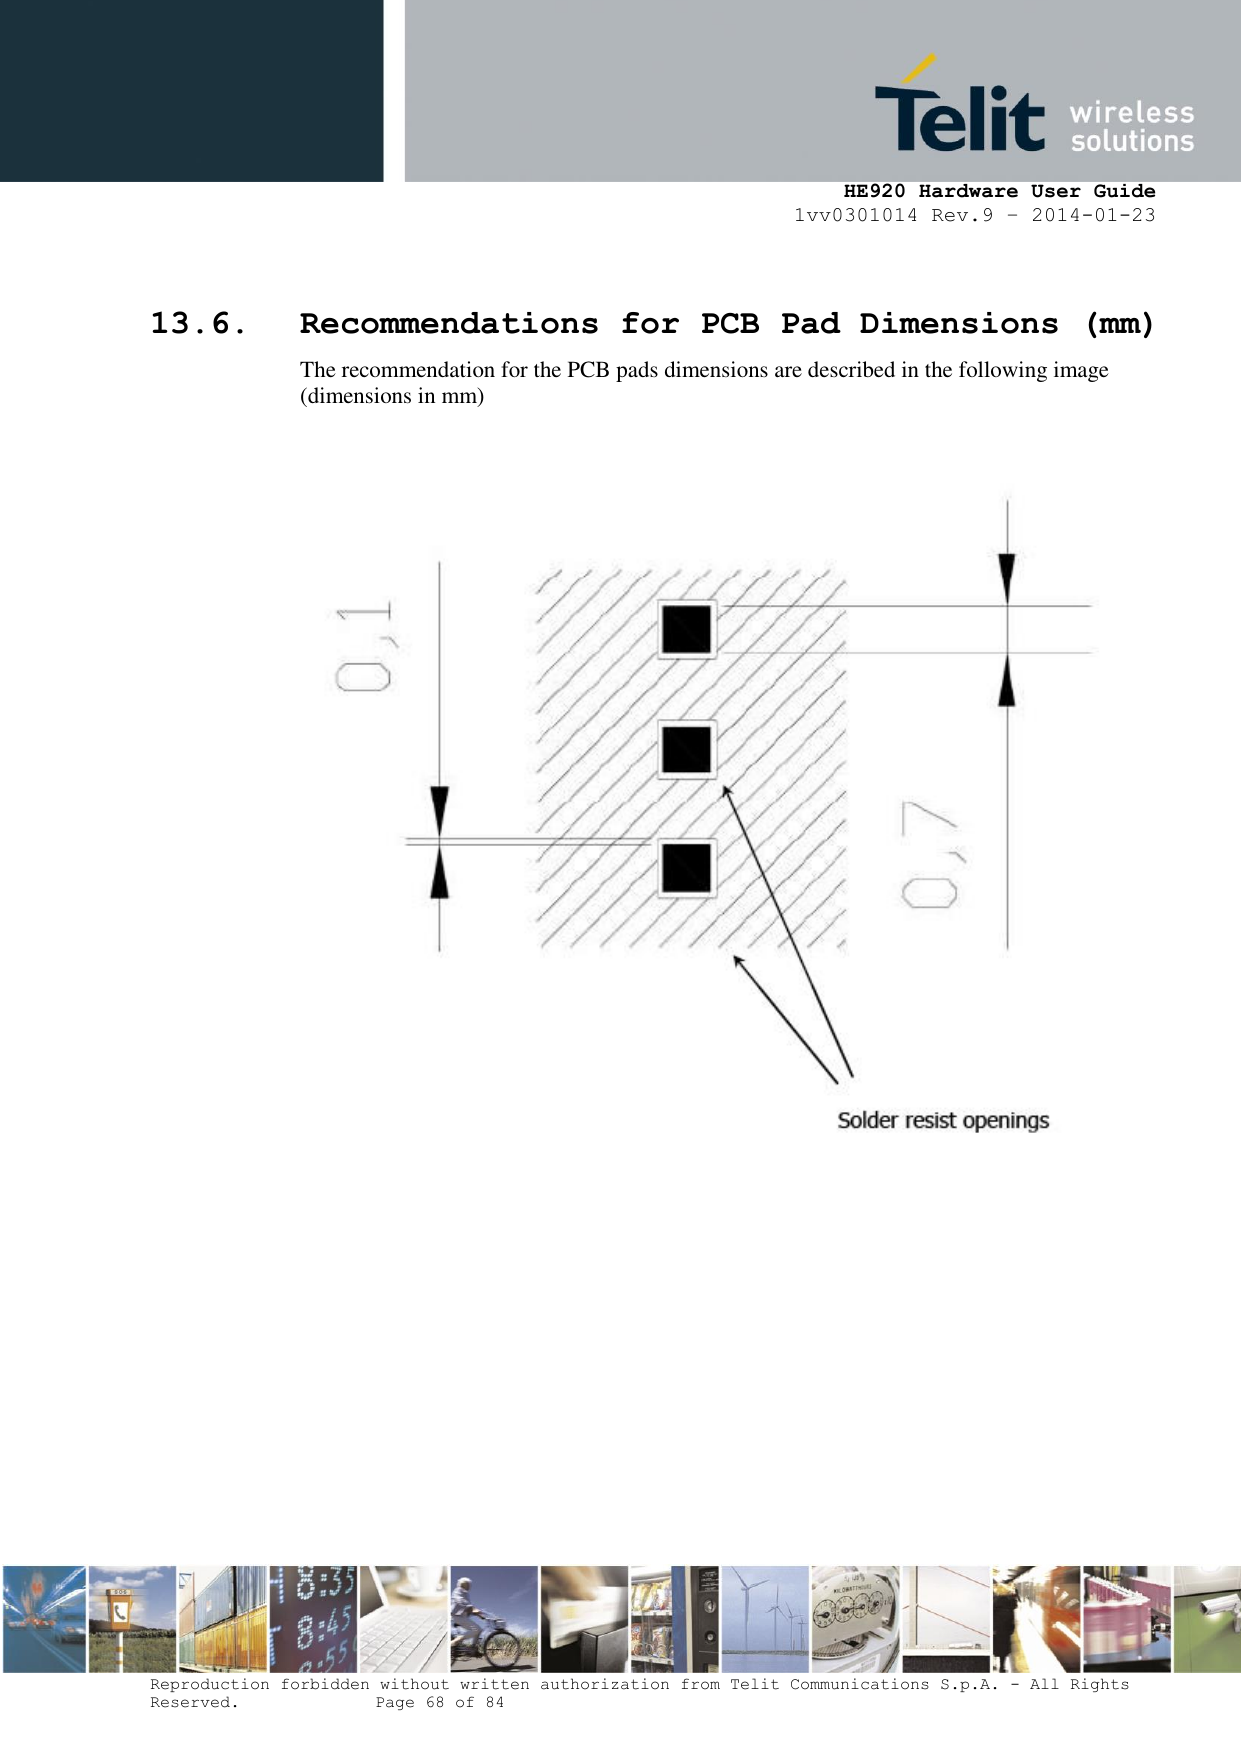     HE920 Hardware User Guide 1vv0301014 Rev.9 – 2014-01-23 Reproduction forbidden without written authorization from Telit Communications S.p.A. - All Rights Reserved.    Page 68 of 84   13.6. Recommendations for PCB Pad Dimensions (mm) The recommendation for the PCB pads dimensions are described in the following image (dimensions in mm)   